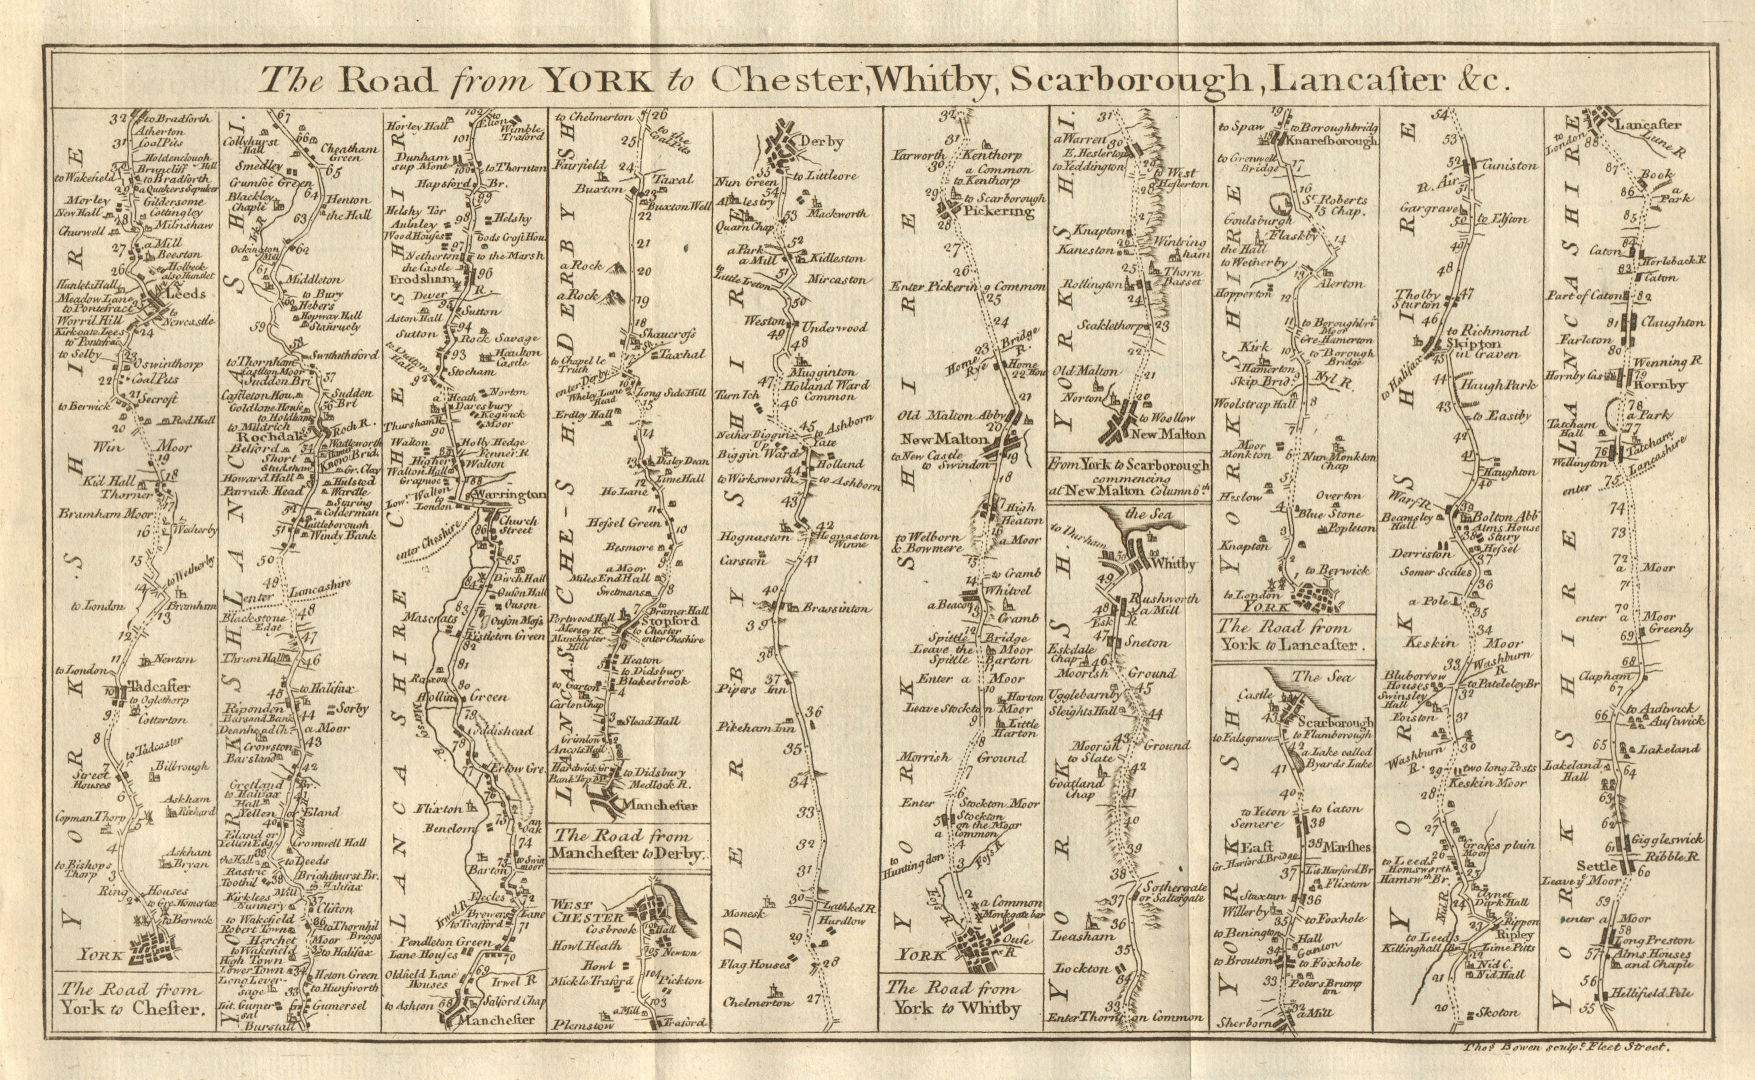 Associate Product York to Chester, Whitby, Scarborough & Lancaster road strip map. BOWEN 1775